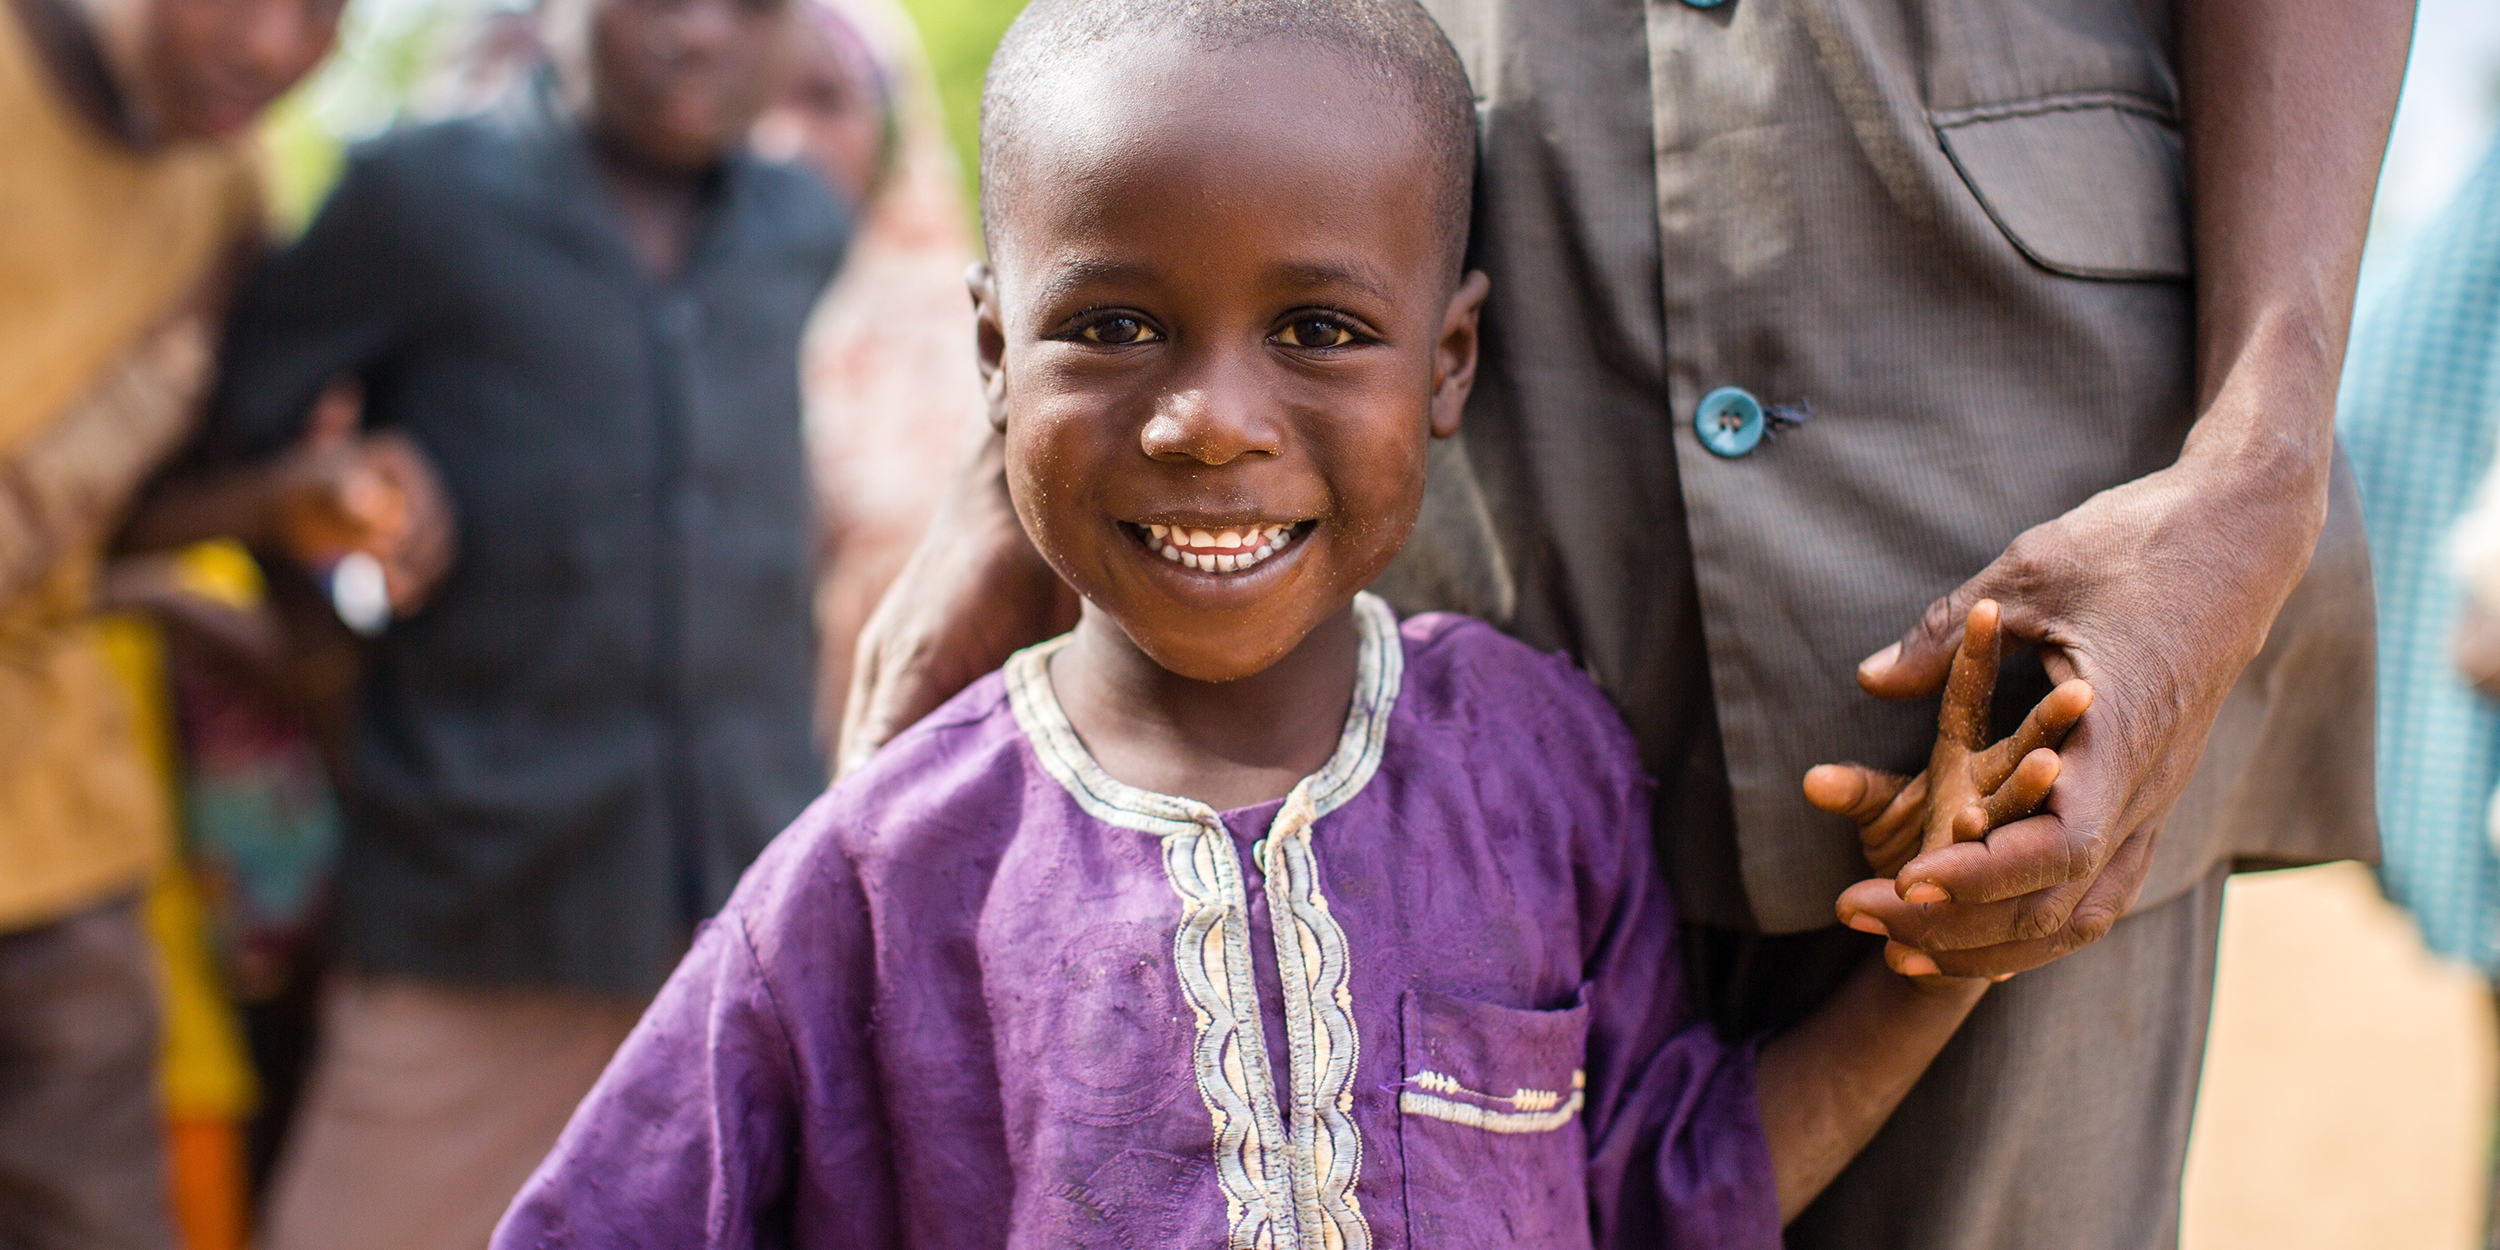 A 6-year-old boy dressed in a bright purple tunic smiles for the camera after an Early Childhood Care and Development class in his community in Maradi, Niger. Photo credit: Victoria Zegler/Save the Children, December 2016. 